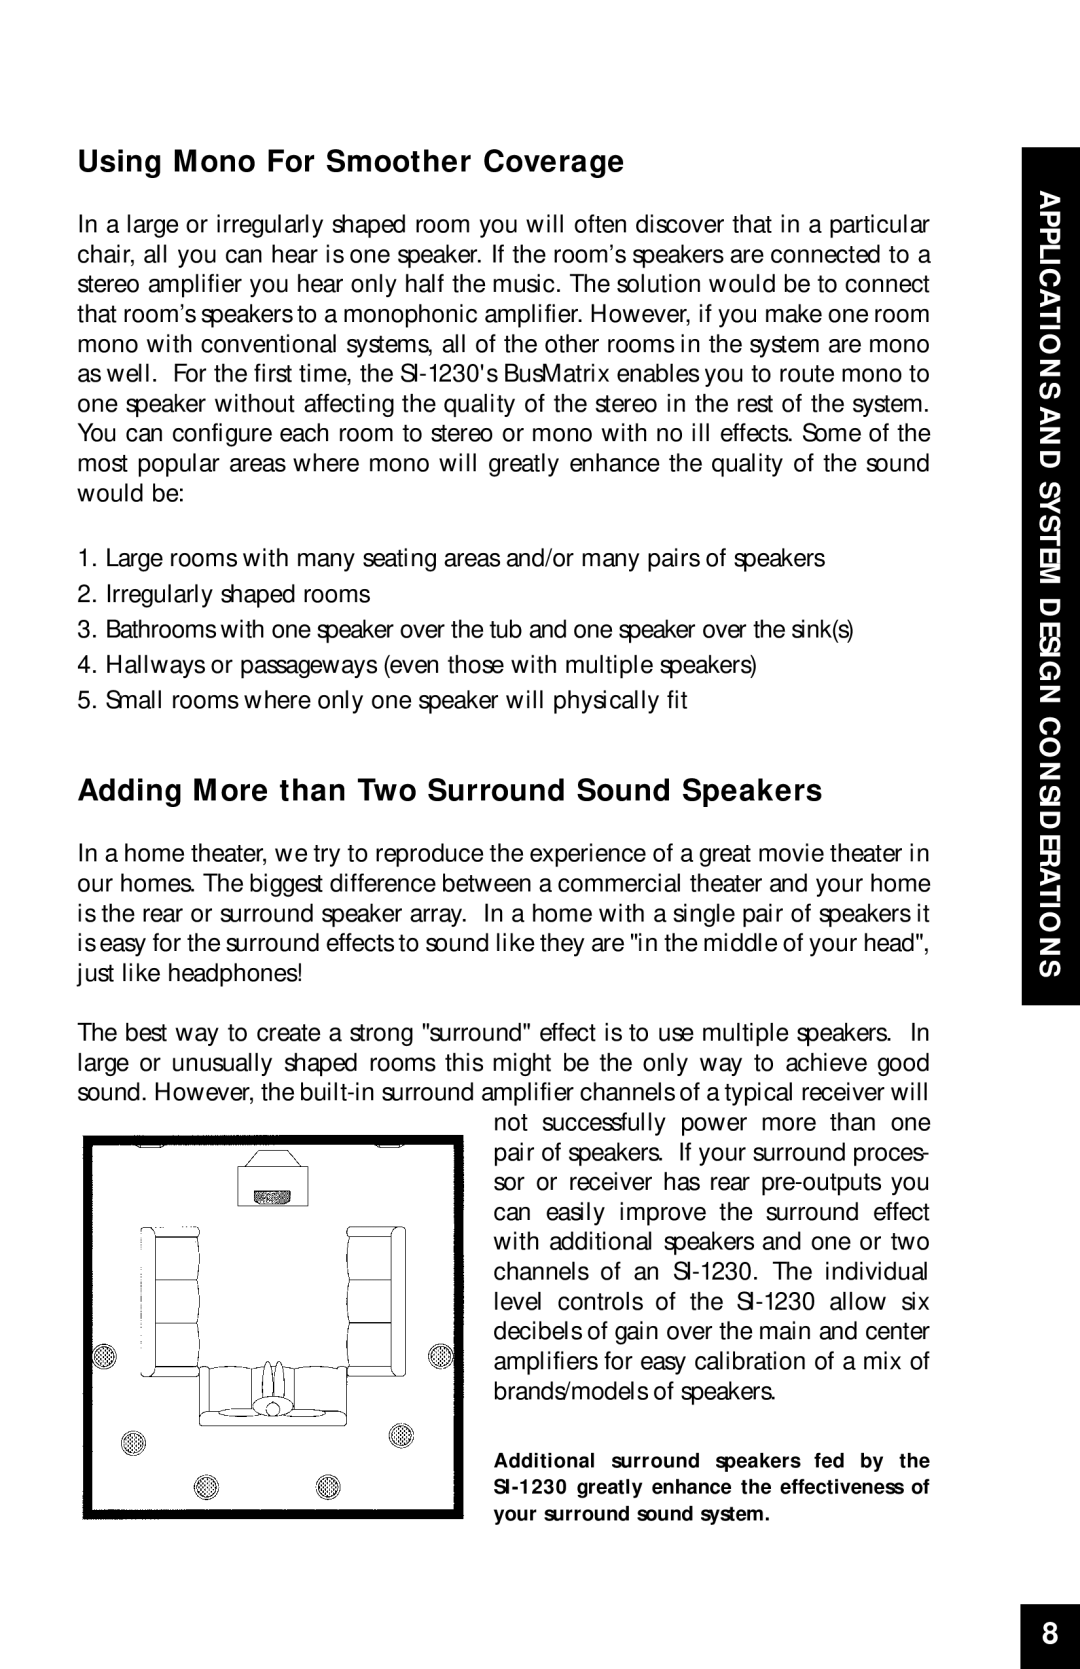 Niles Audio SI-1230 manual Using Mono For Smoother Coverage, Adding More than Two Surround Sound Speakers 